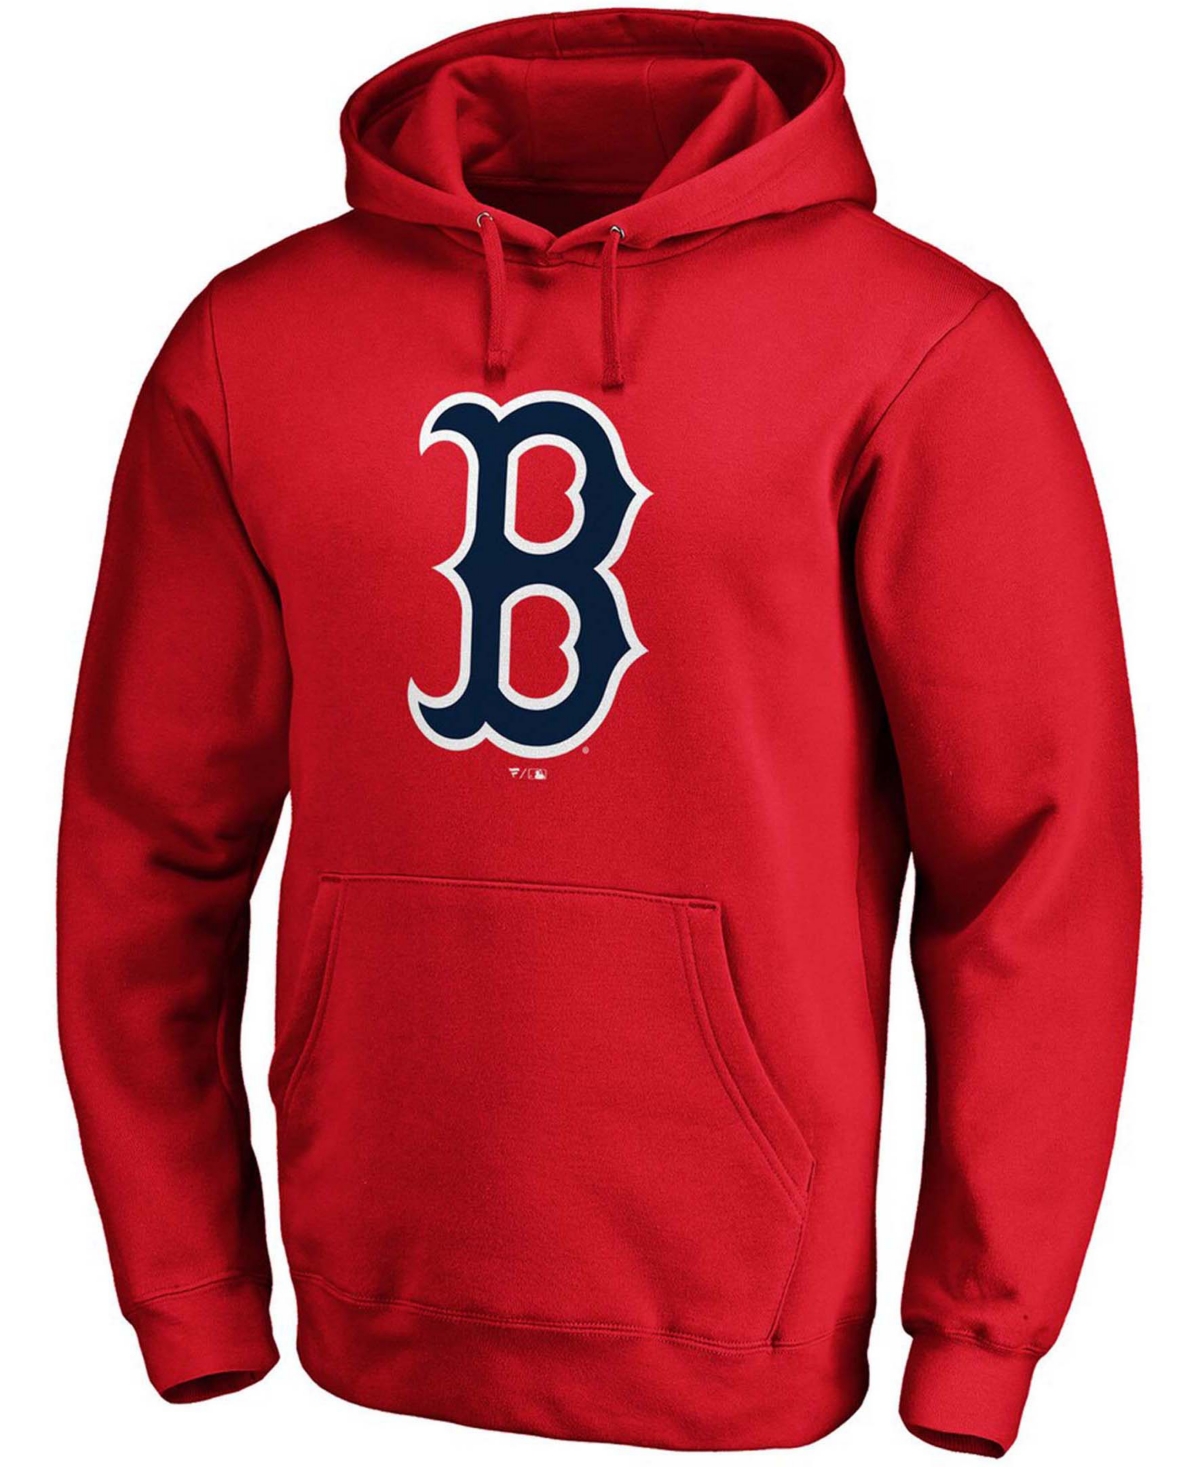 Shop Fanatics Men's Red Boston Red Sox Official Logo Pullover Hoodie